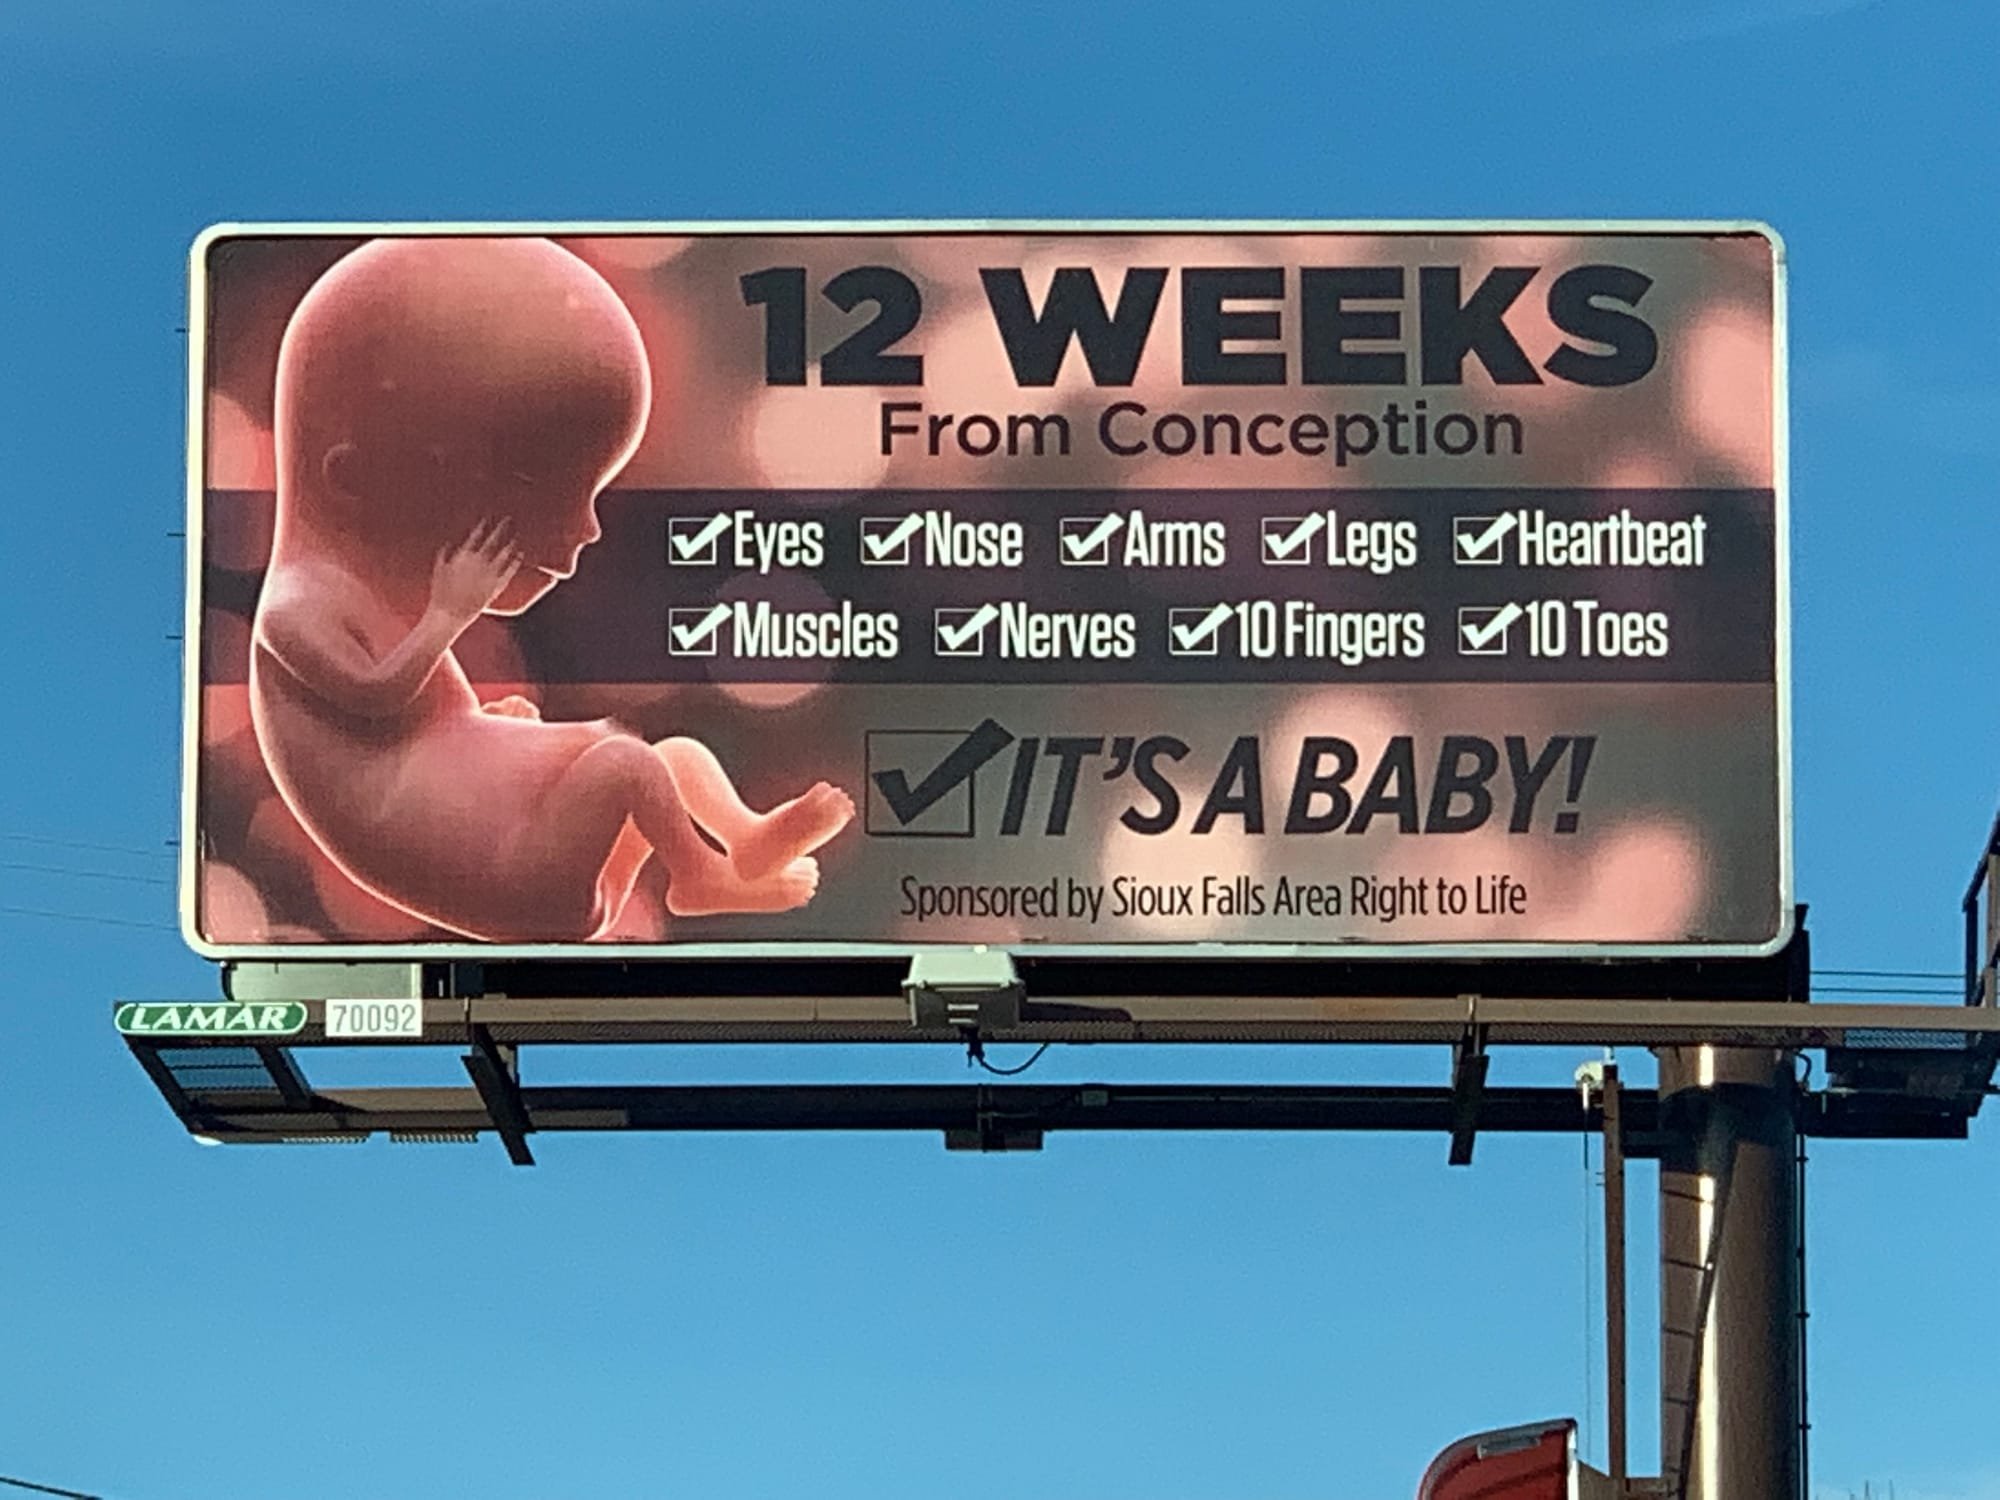 41st & Western - Designed by Sioux Falls Area Right to Life